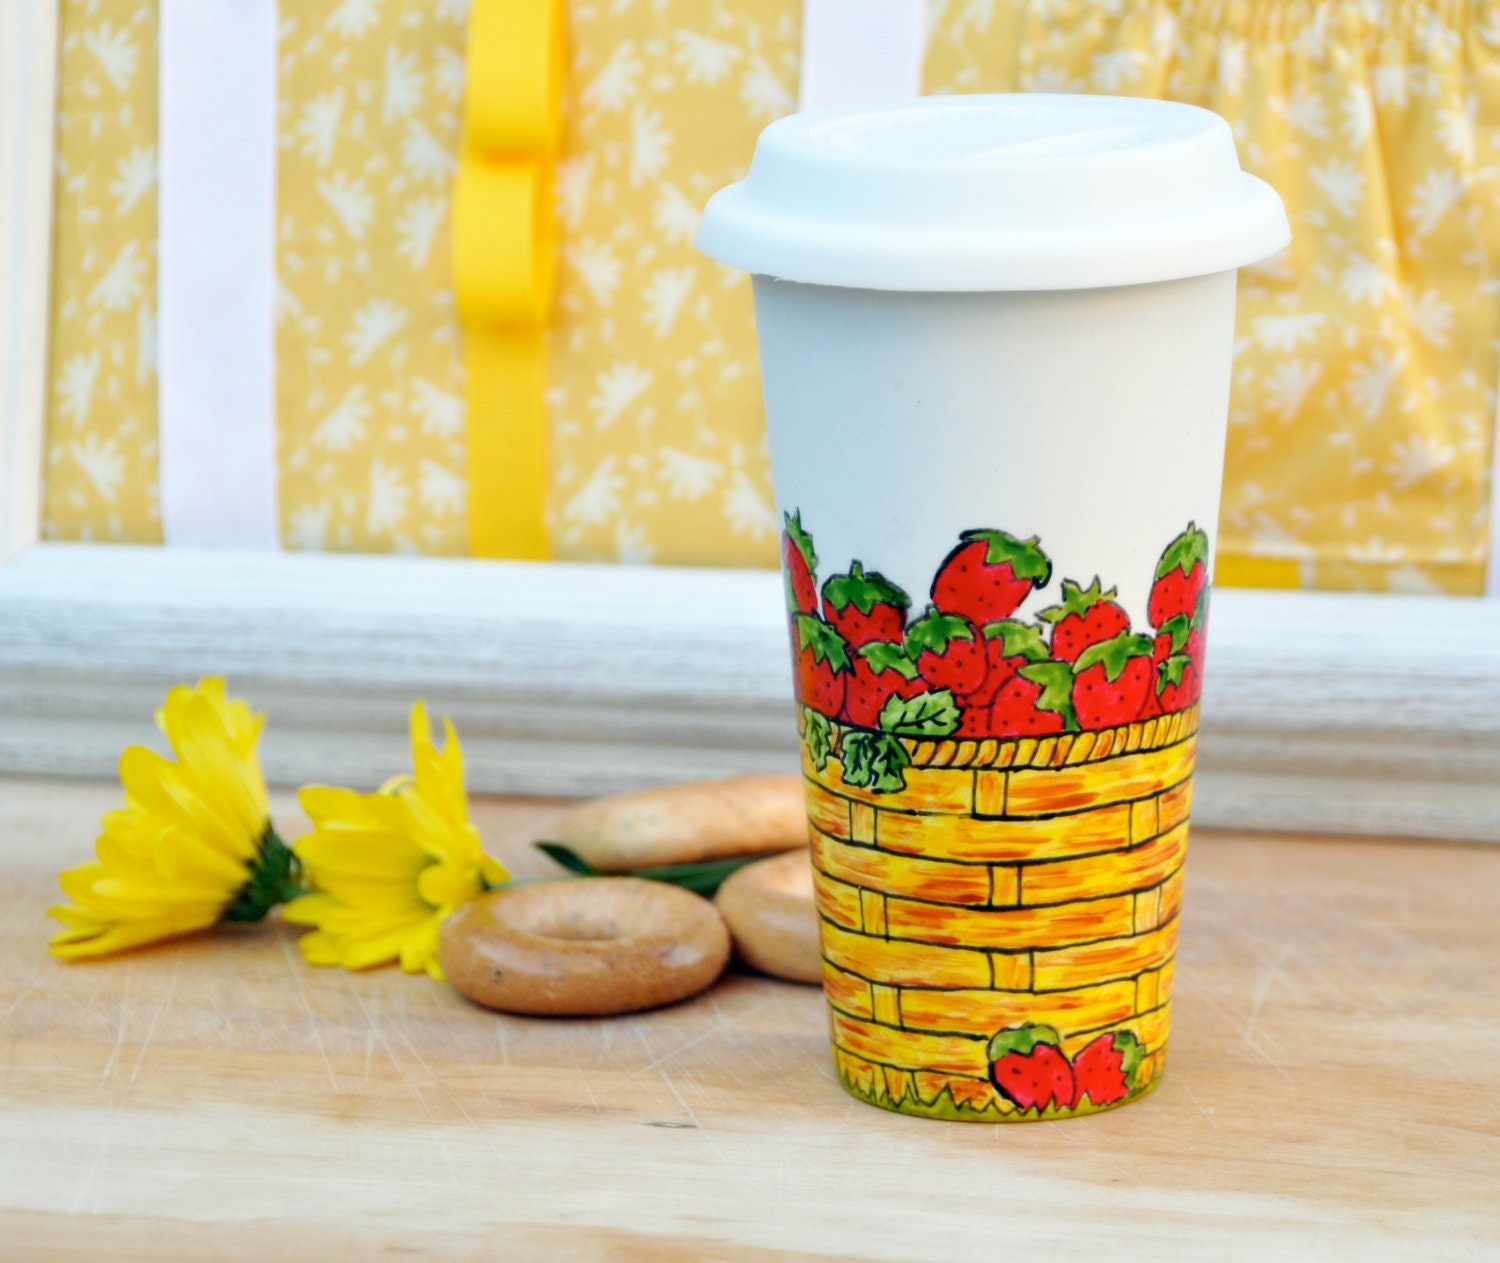 Porcelain Travel Mug - Hand Painted Ceramic Eco Cup with Lid - Black Friday - Cyber Monday